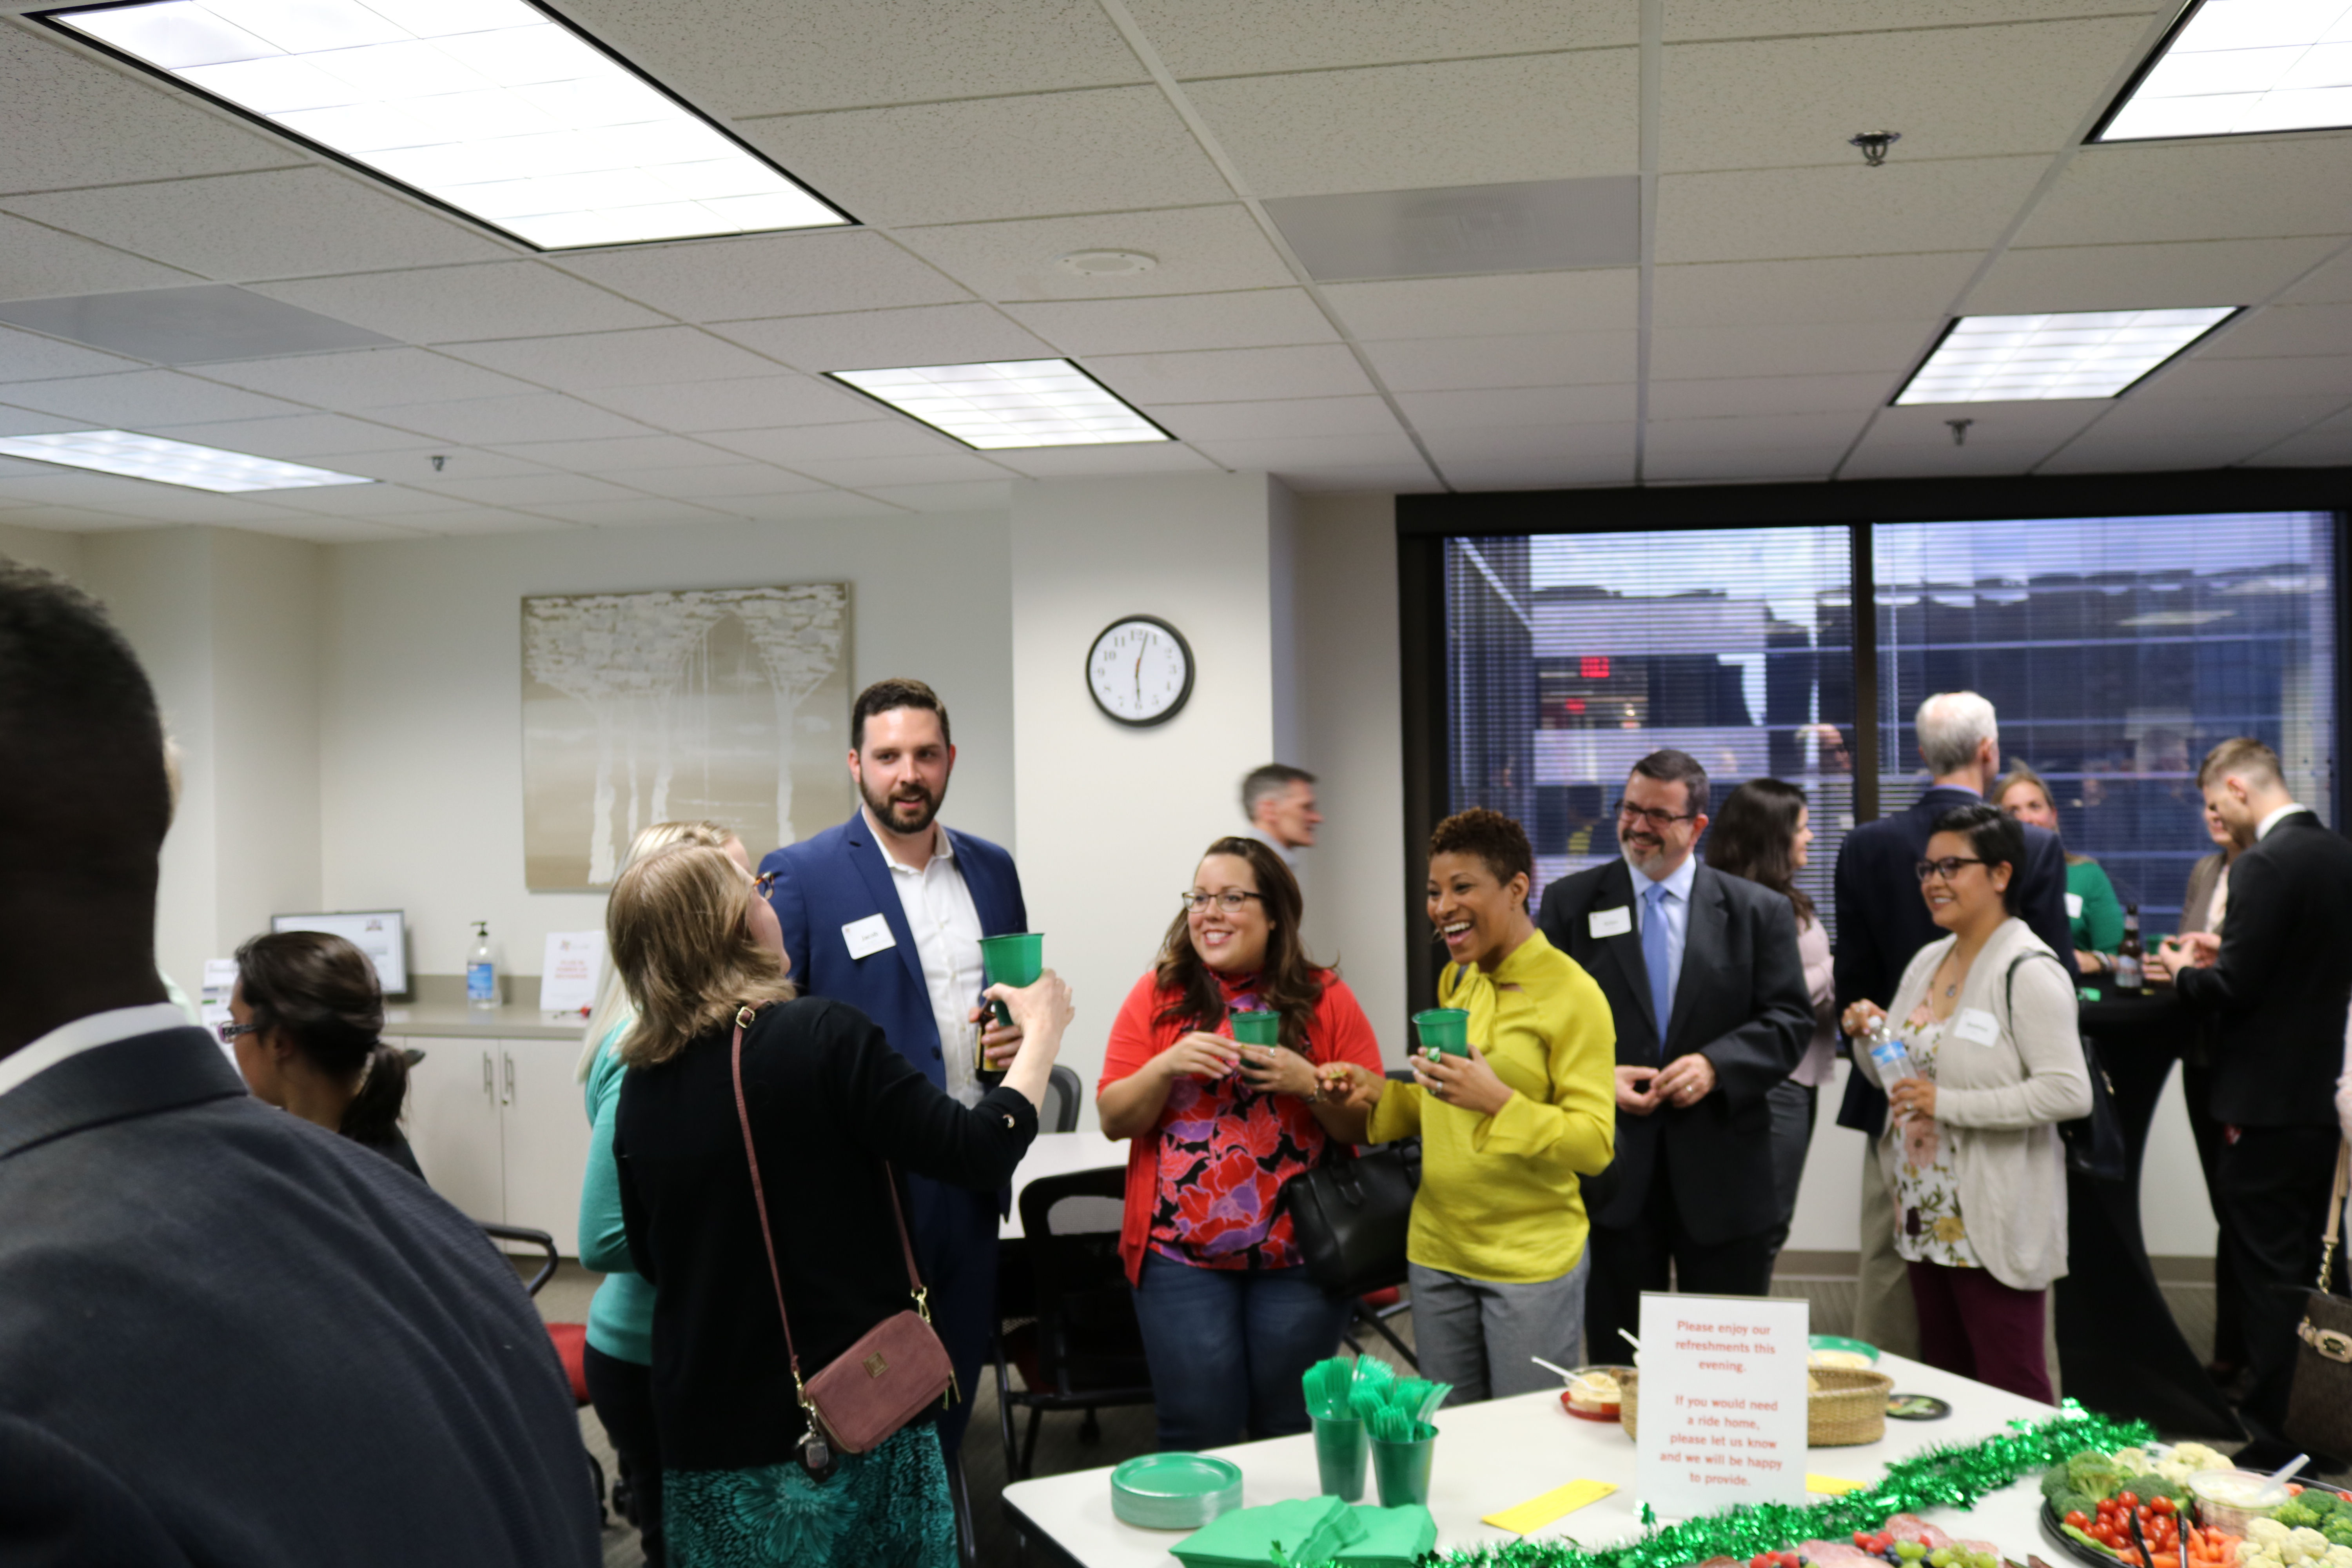 Networking Event At DallasHR Office